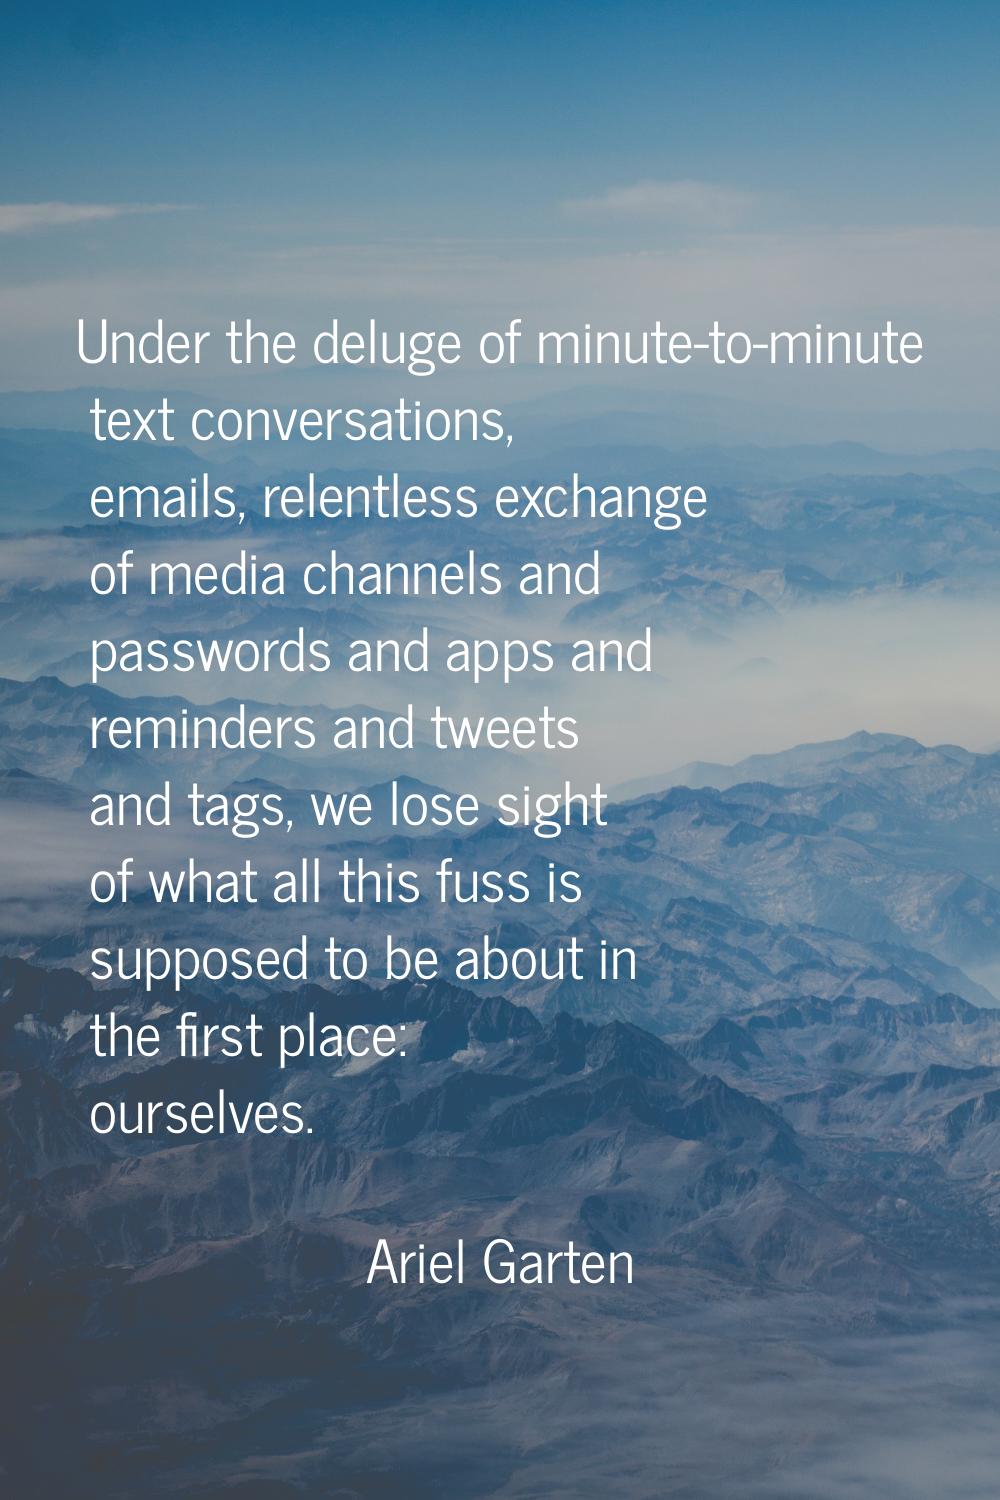 Under the deluge of minute-to-minute text conversations, emails, relentless exchange of media chann